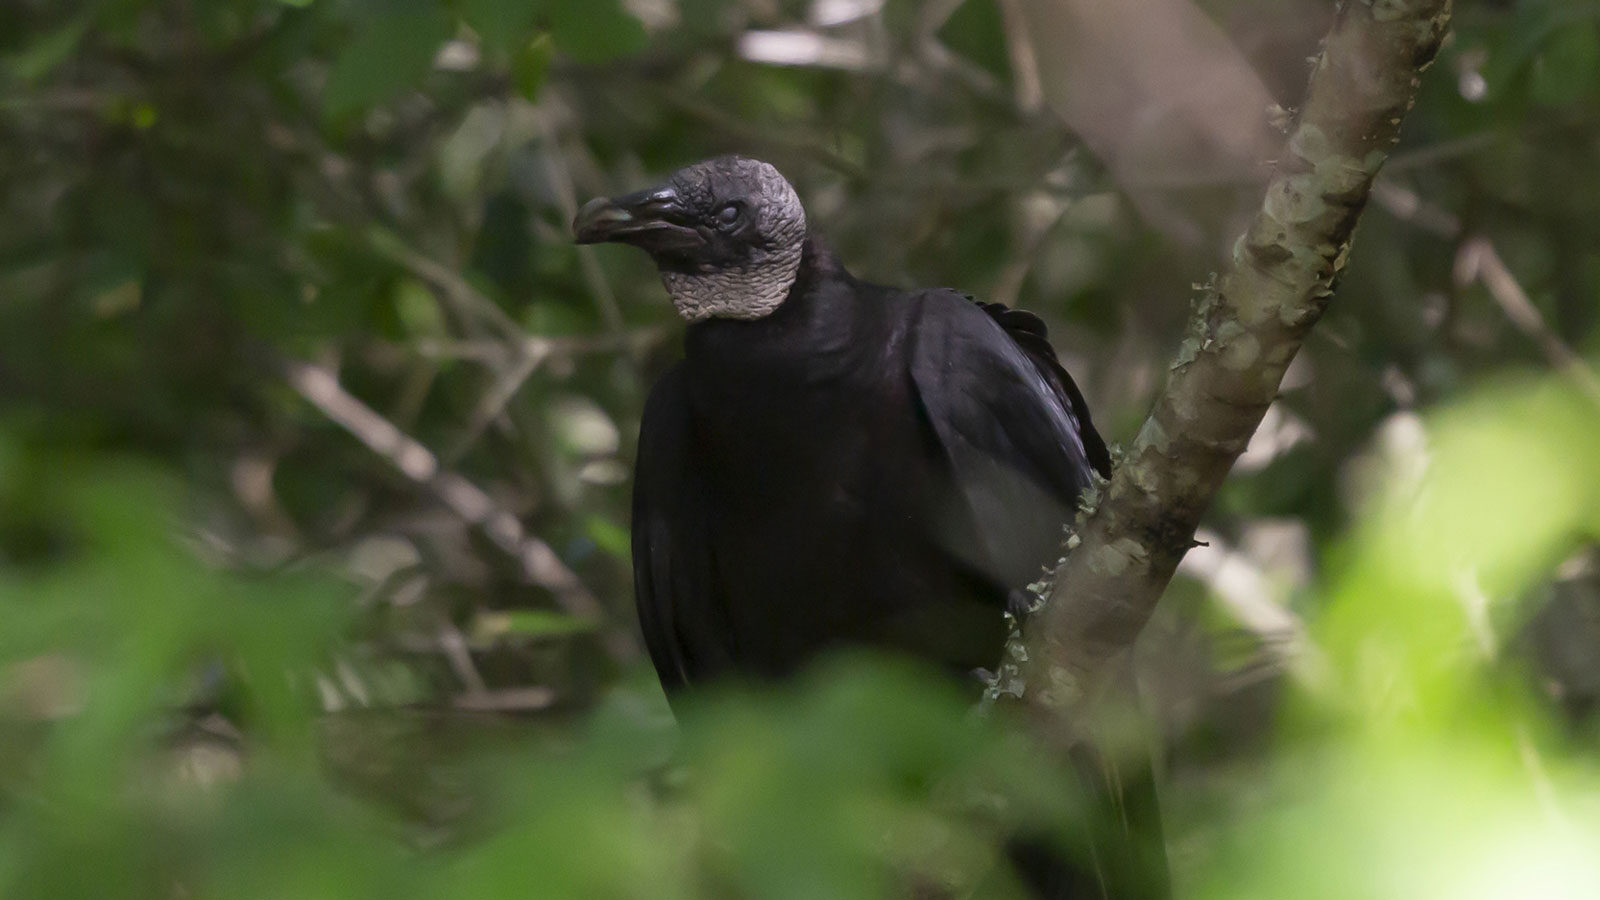 Black vulture through the bramble on a tree branch